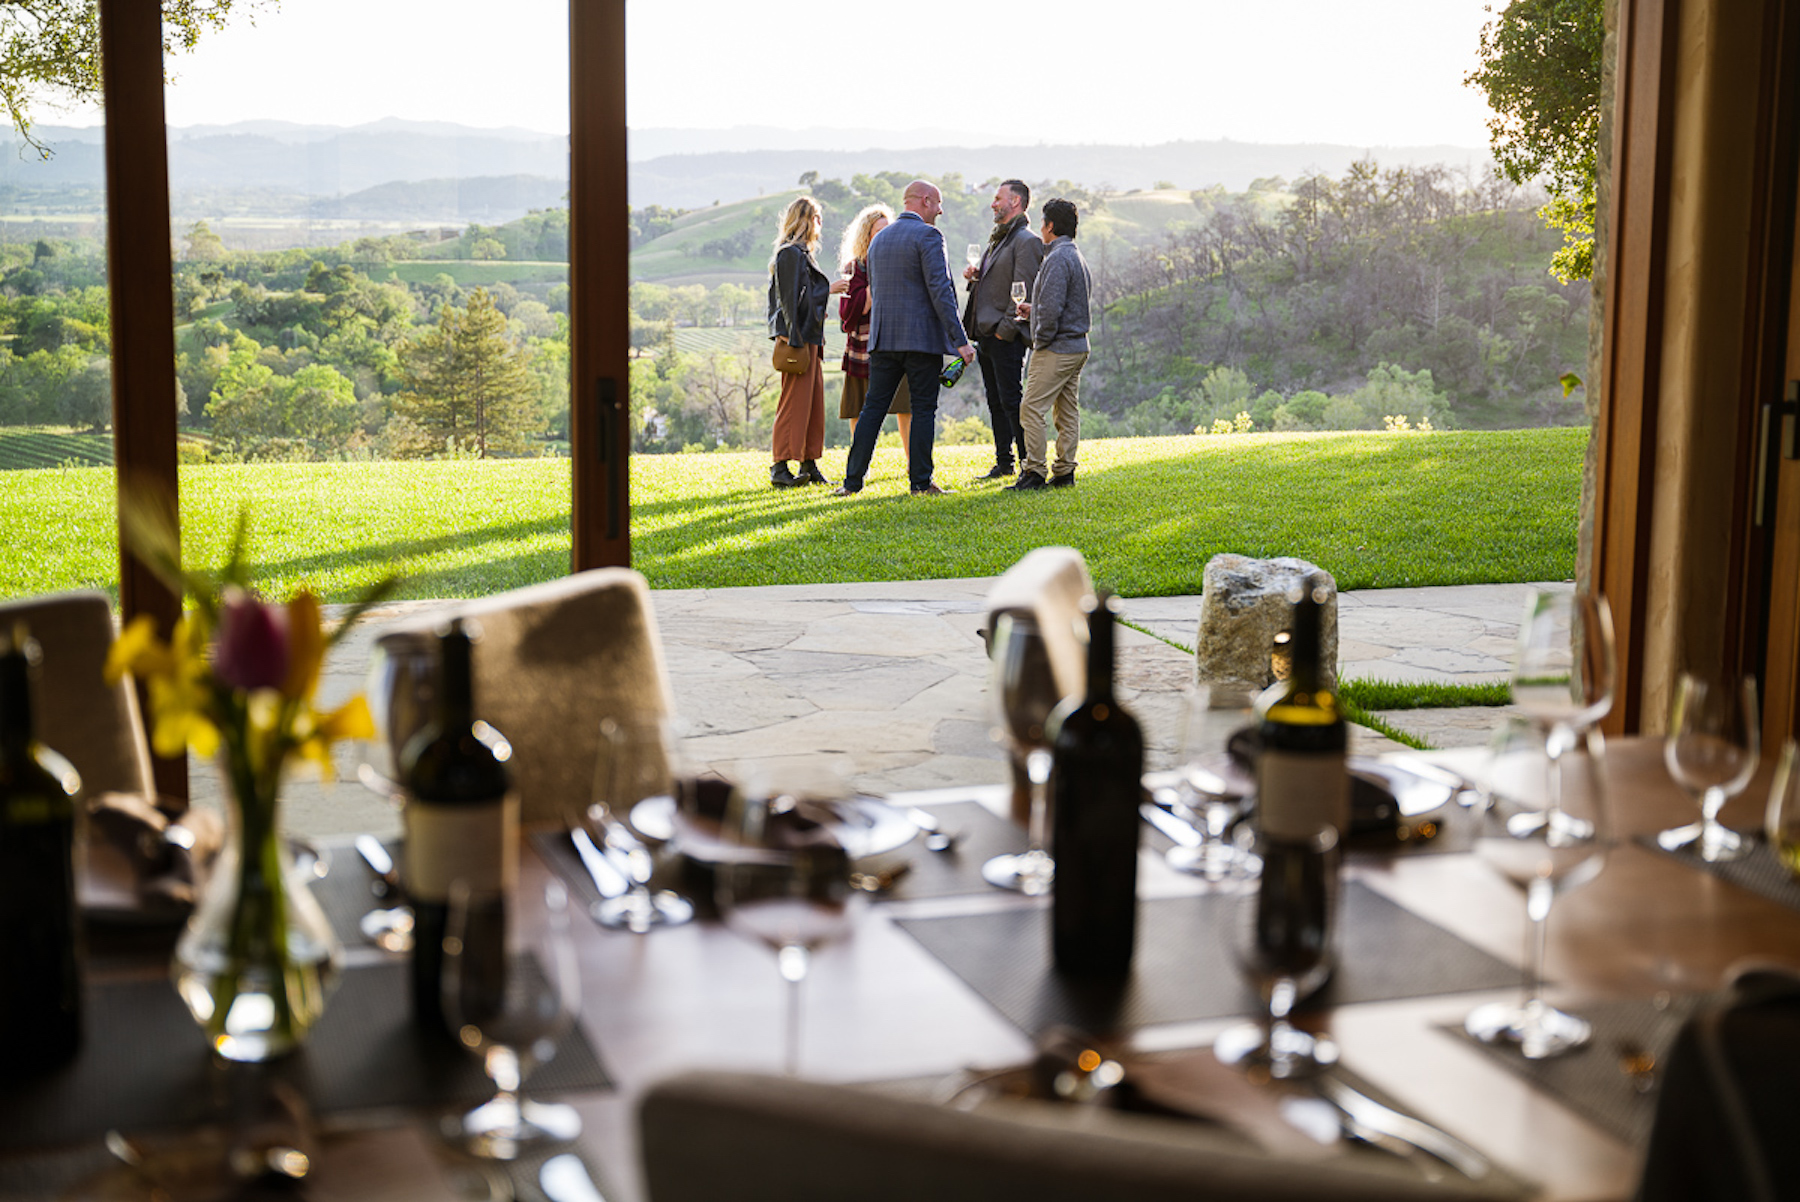 A view over a dinner table to the lawn and vista beyond, with a group of friends chatting.